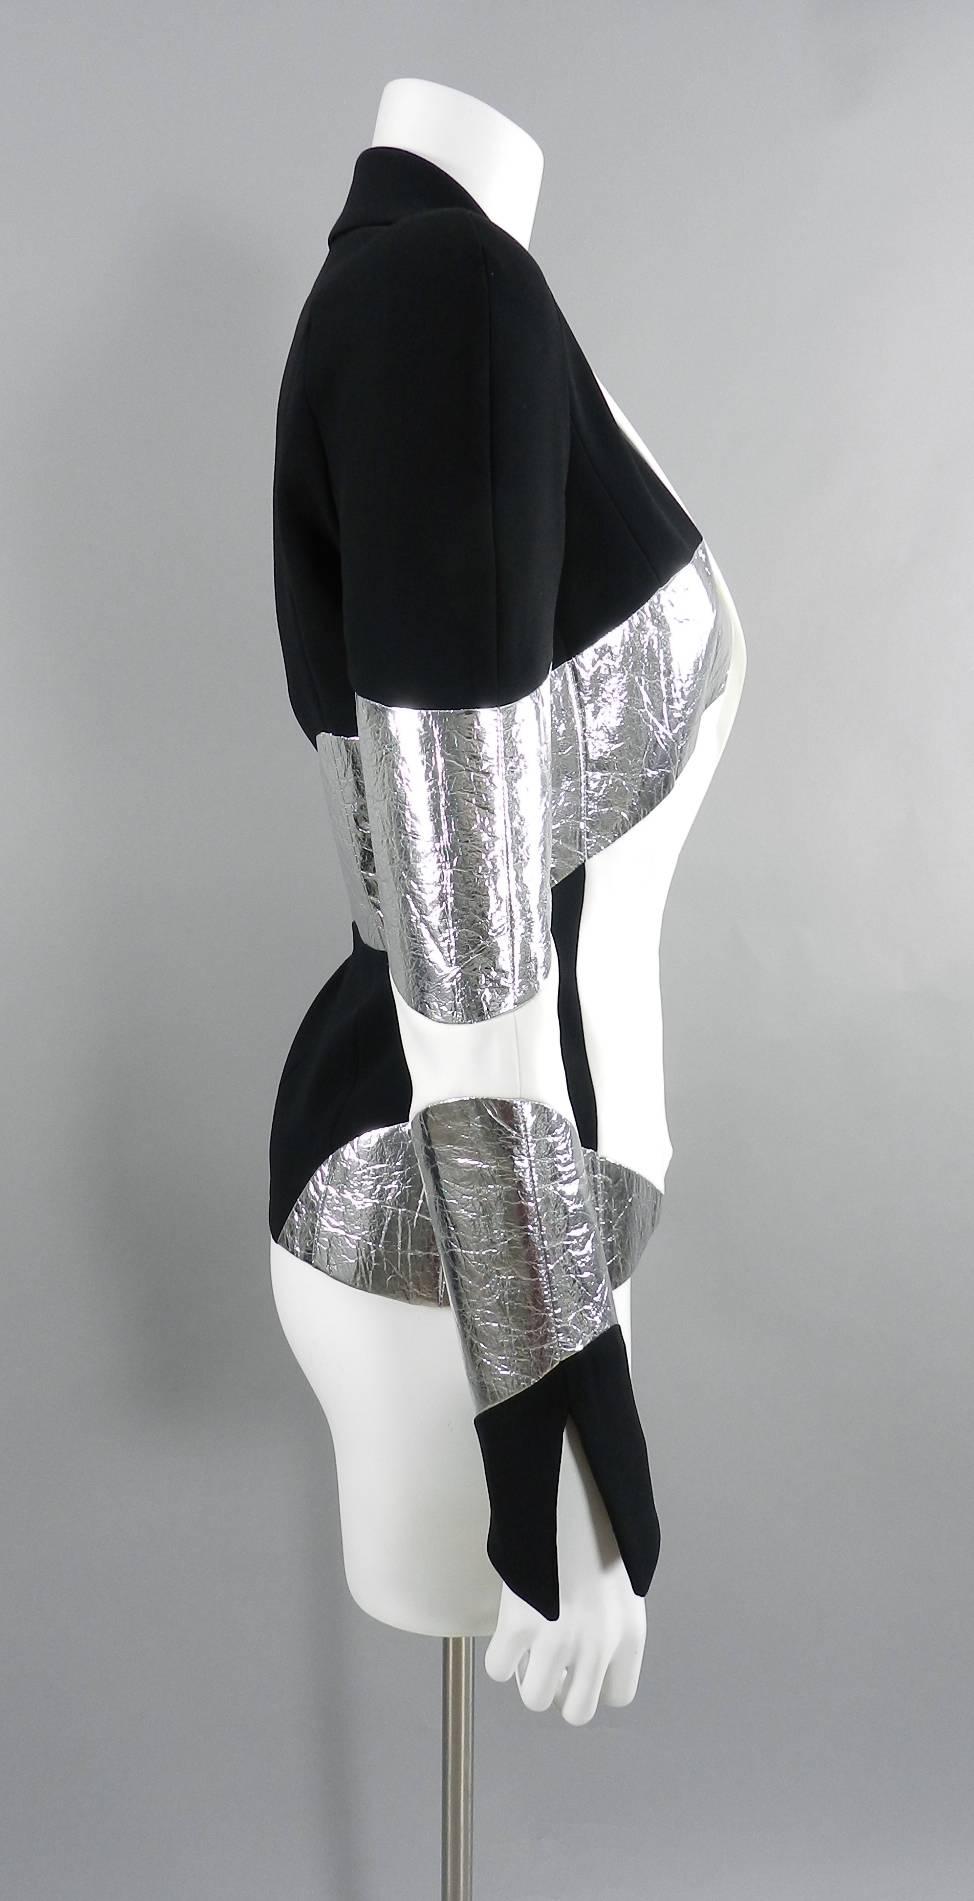 Mugler Resort 2017 Black White Silver Metallic Leather Color Block Jacket.  Signature futuristic Mugler design with rounded shoulders, french cuffs that can be worn down, and notched collar.  Fastens at front with two snaps.  Tagged size FR 36 (USA